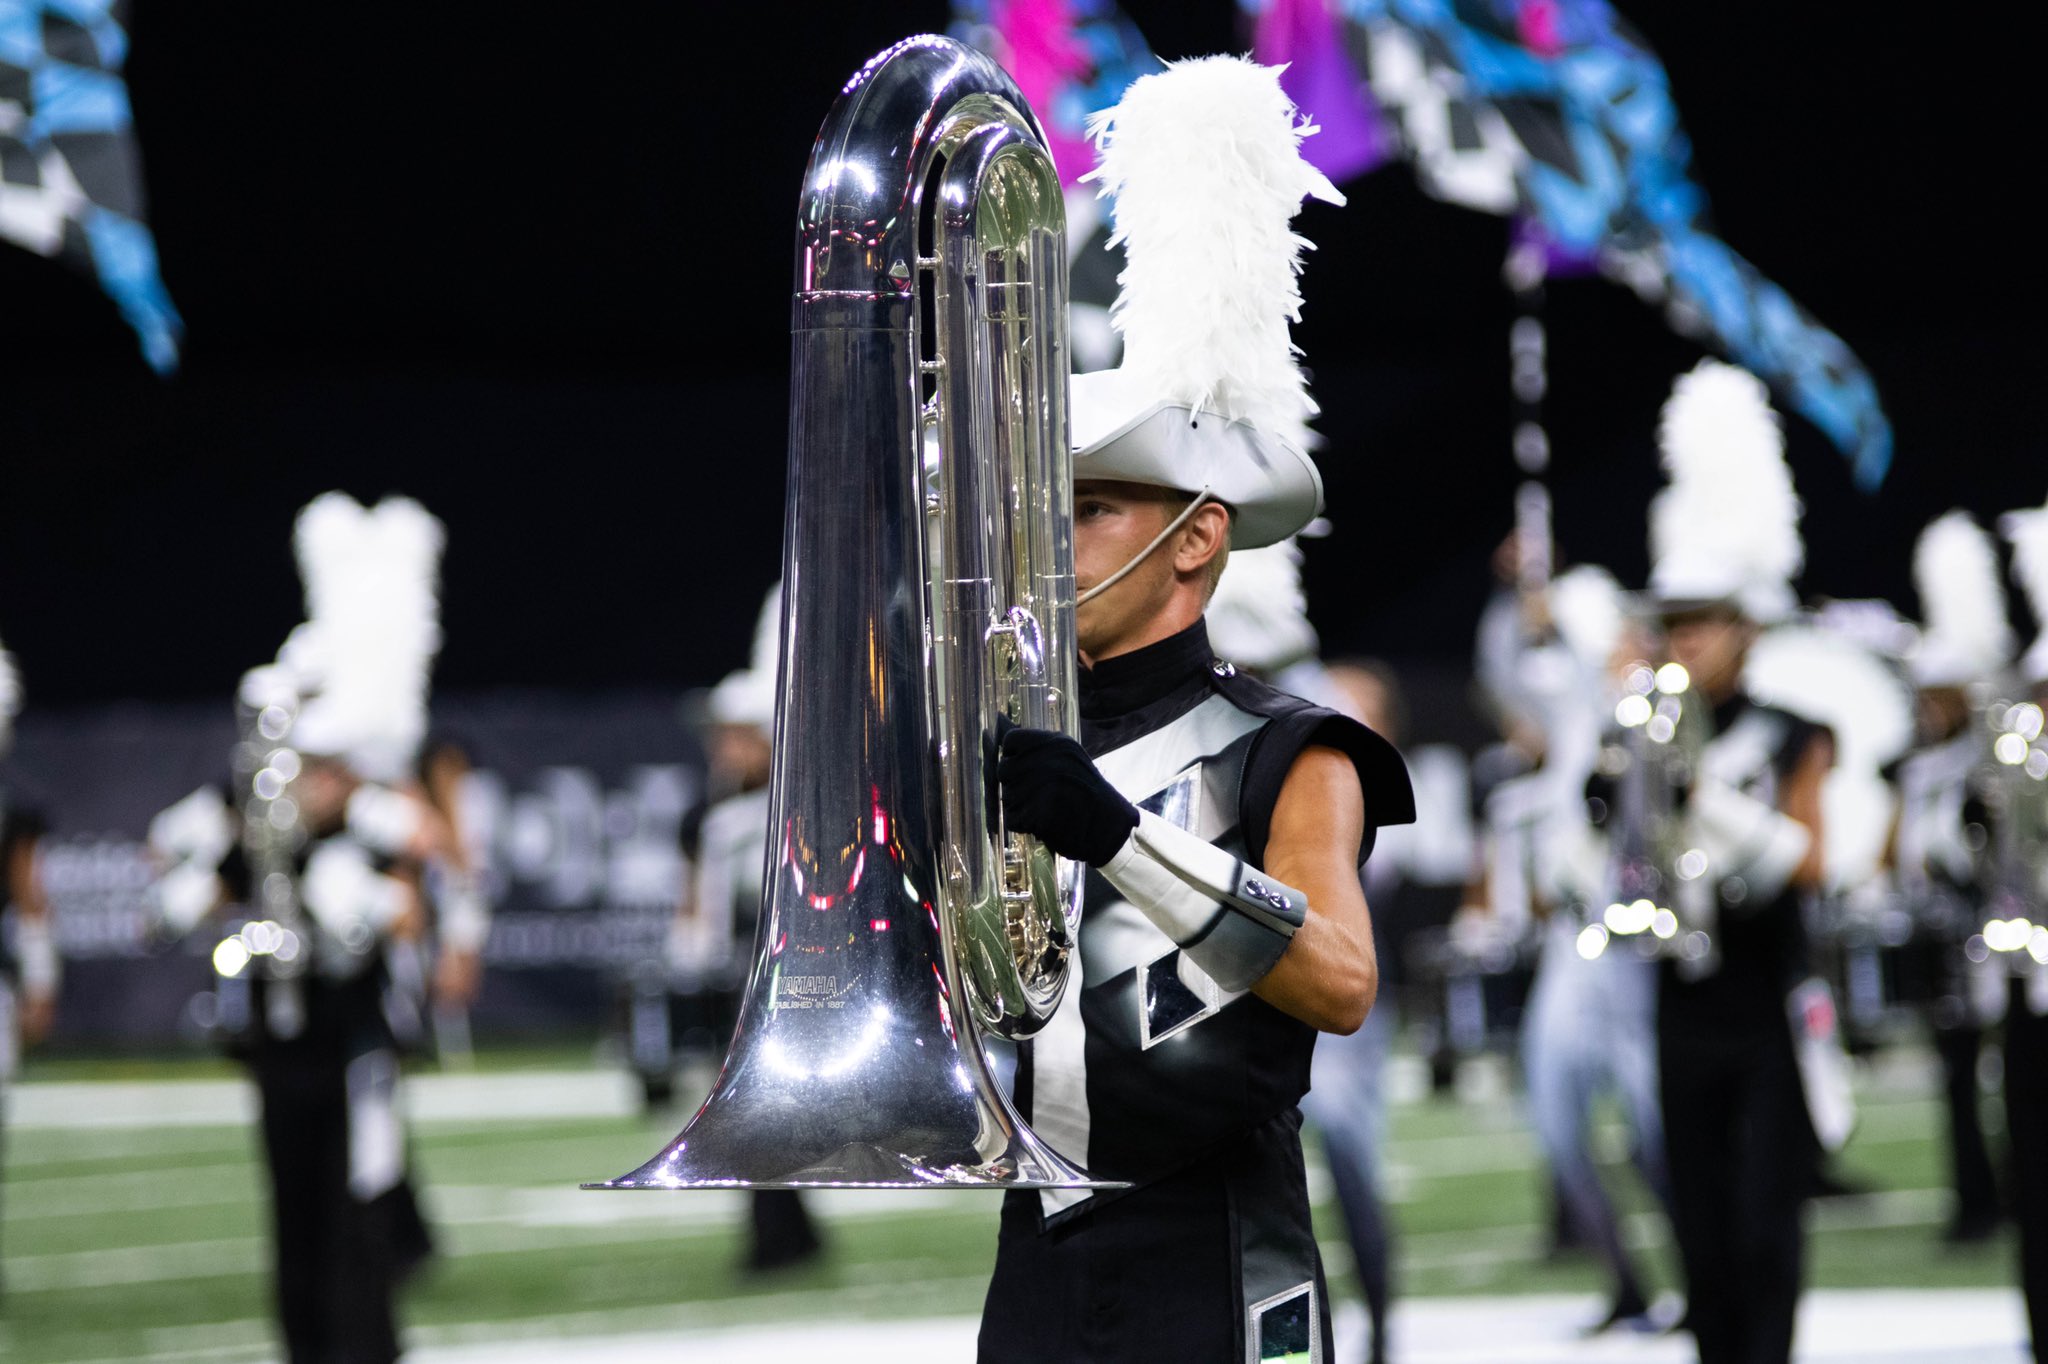 asqueroso etiqueta Hornear Crossmen Drum and Bugle Corps on Twitter: "Today is the perfect day to  register for an eXperience Camp if you love tubas and the Crossmen! ☠️  #tubatuesday https://t.co/l4v9k7quSt https://t.co/XB8lOYx1nD" / Twitter